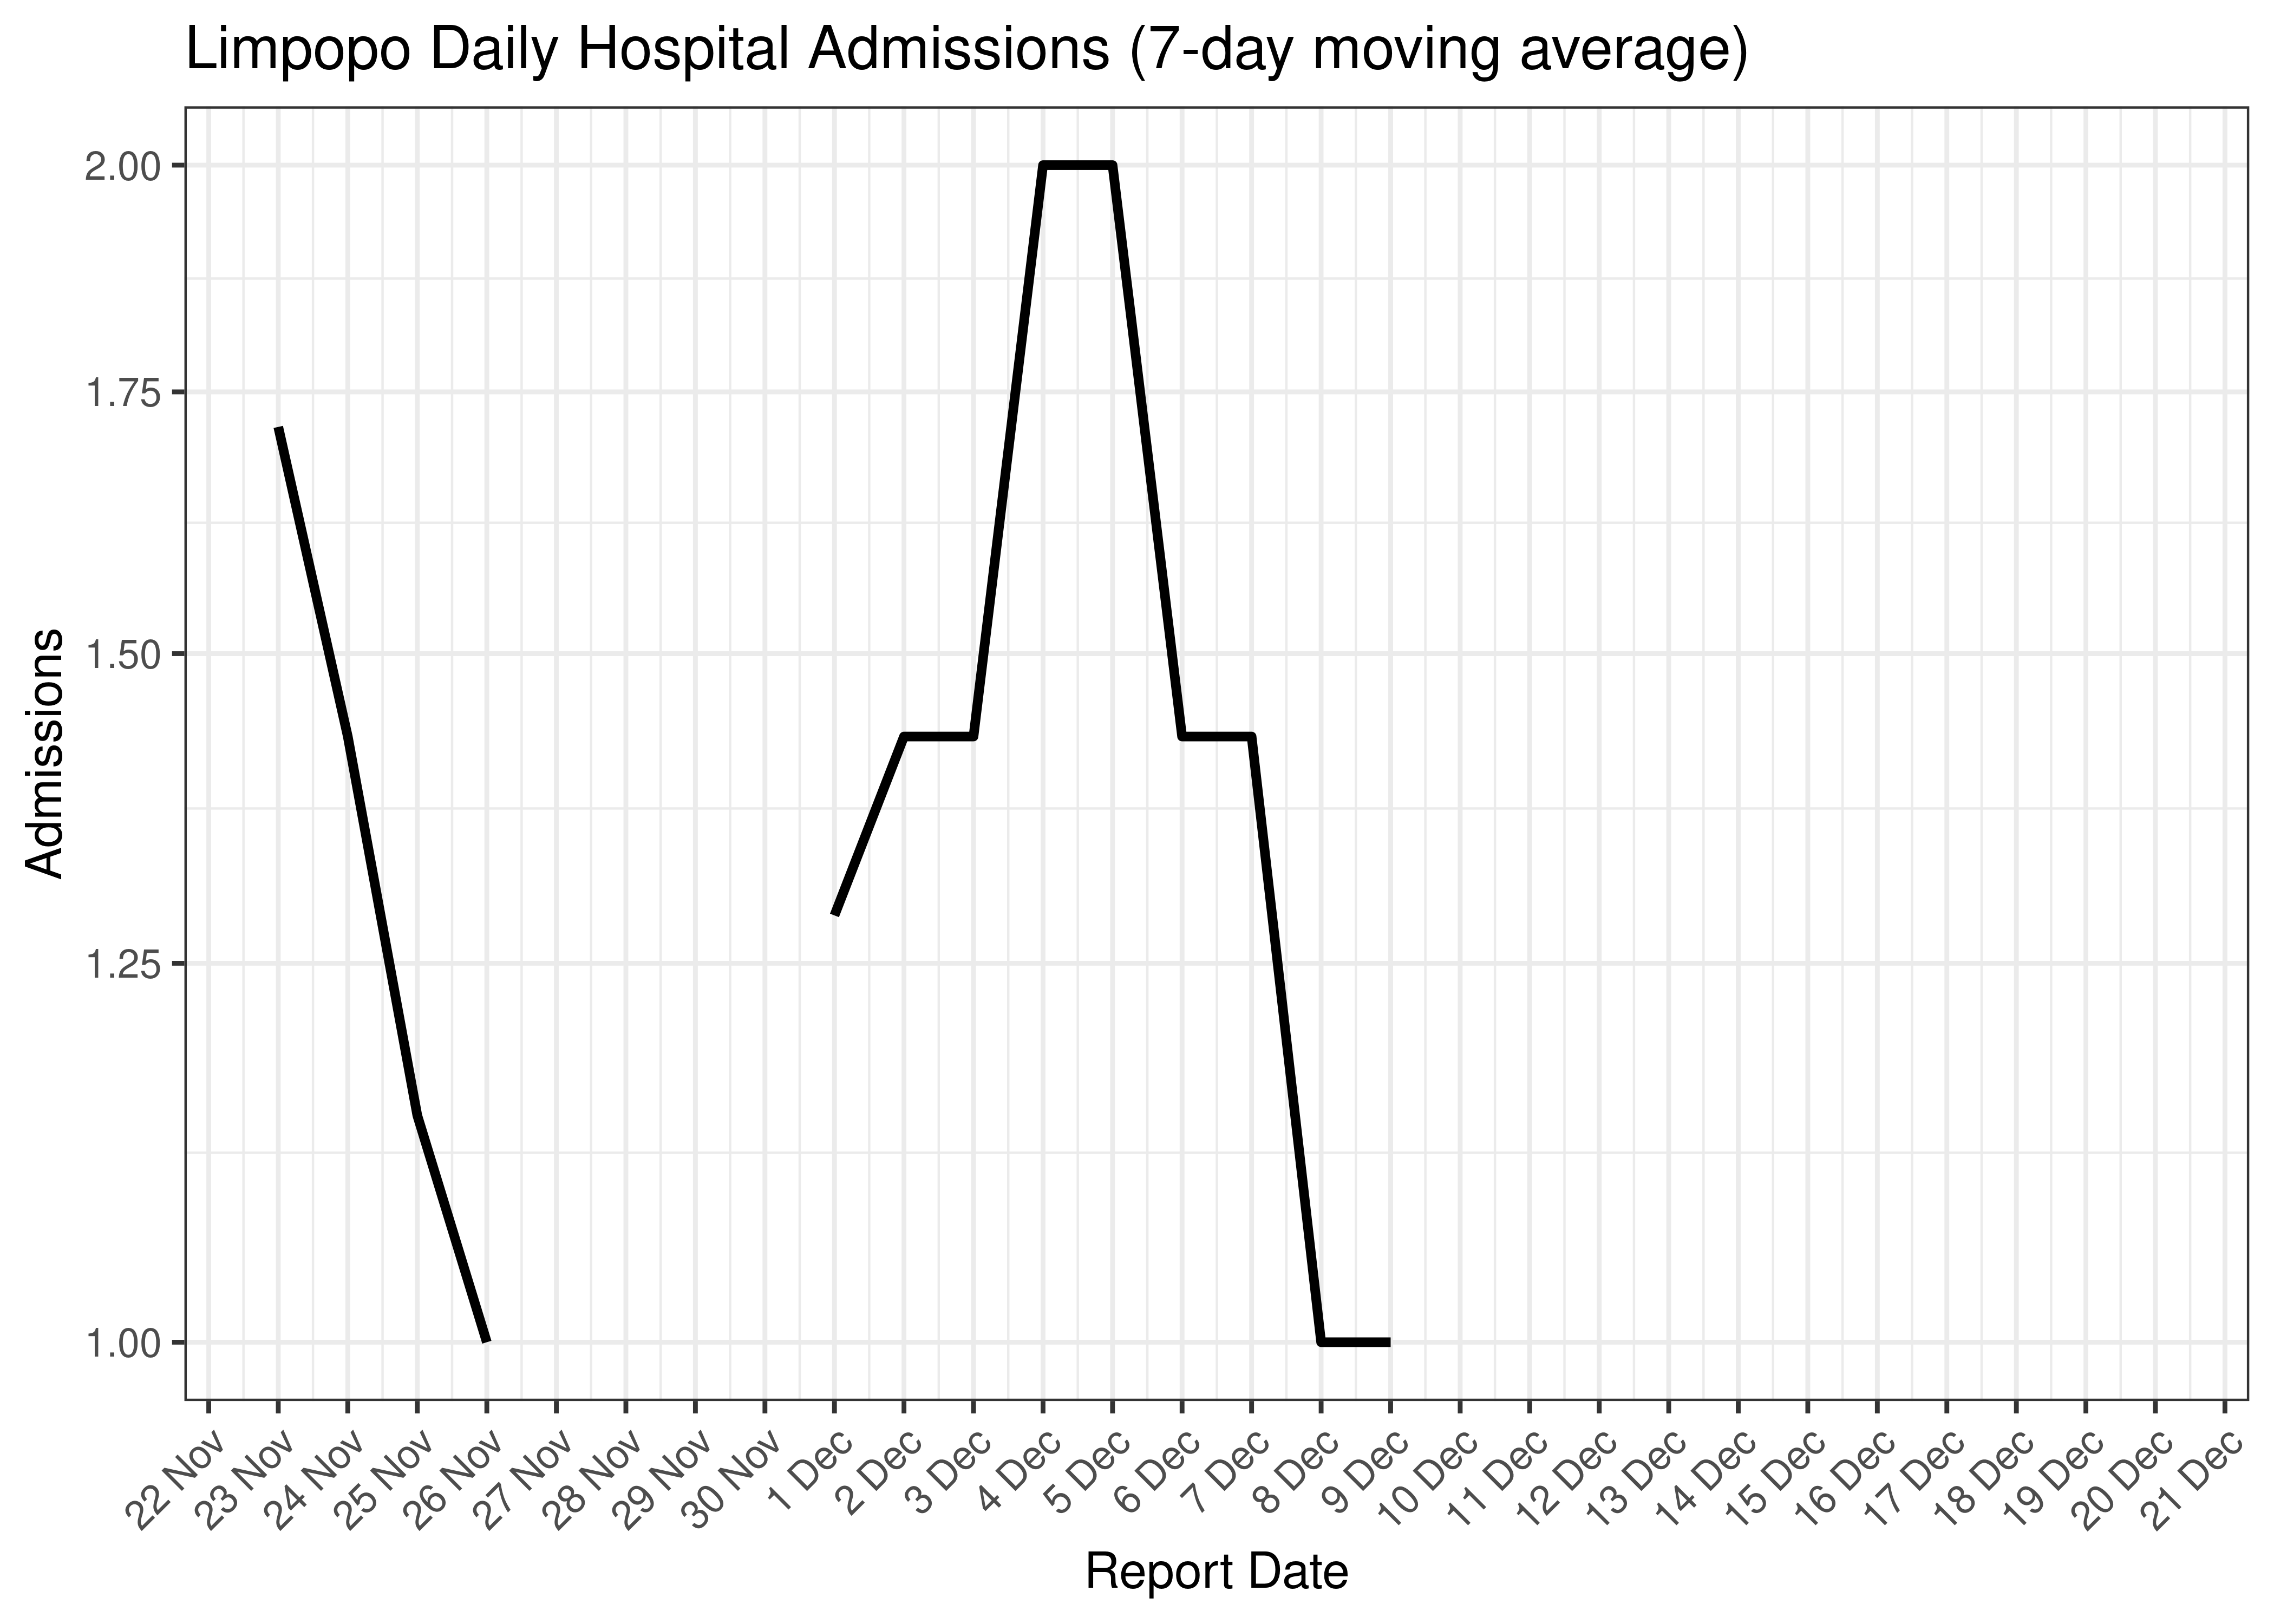 Limpopo Daily Hospital Admissions for Last 30-days (7-day moving average)